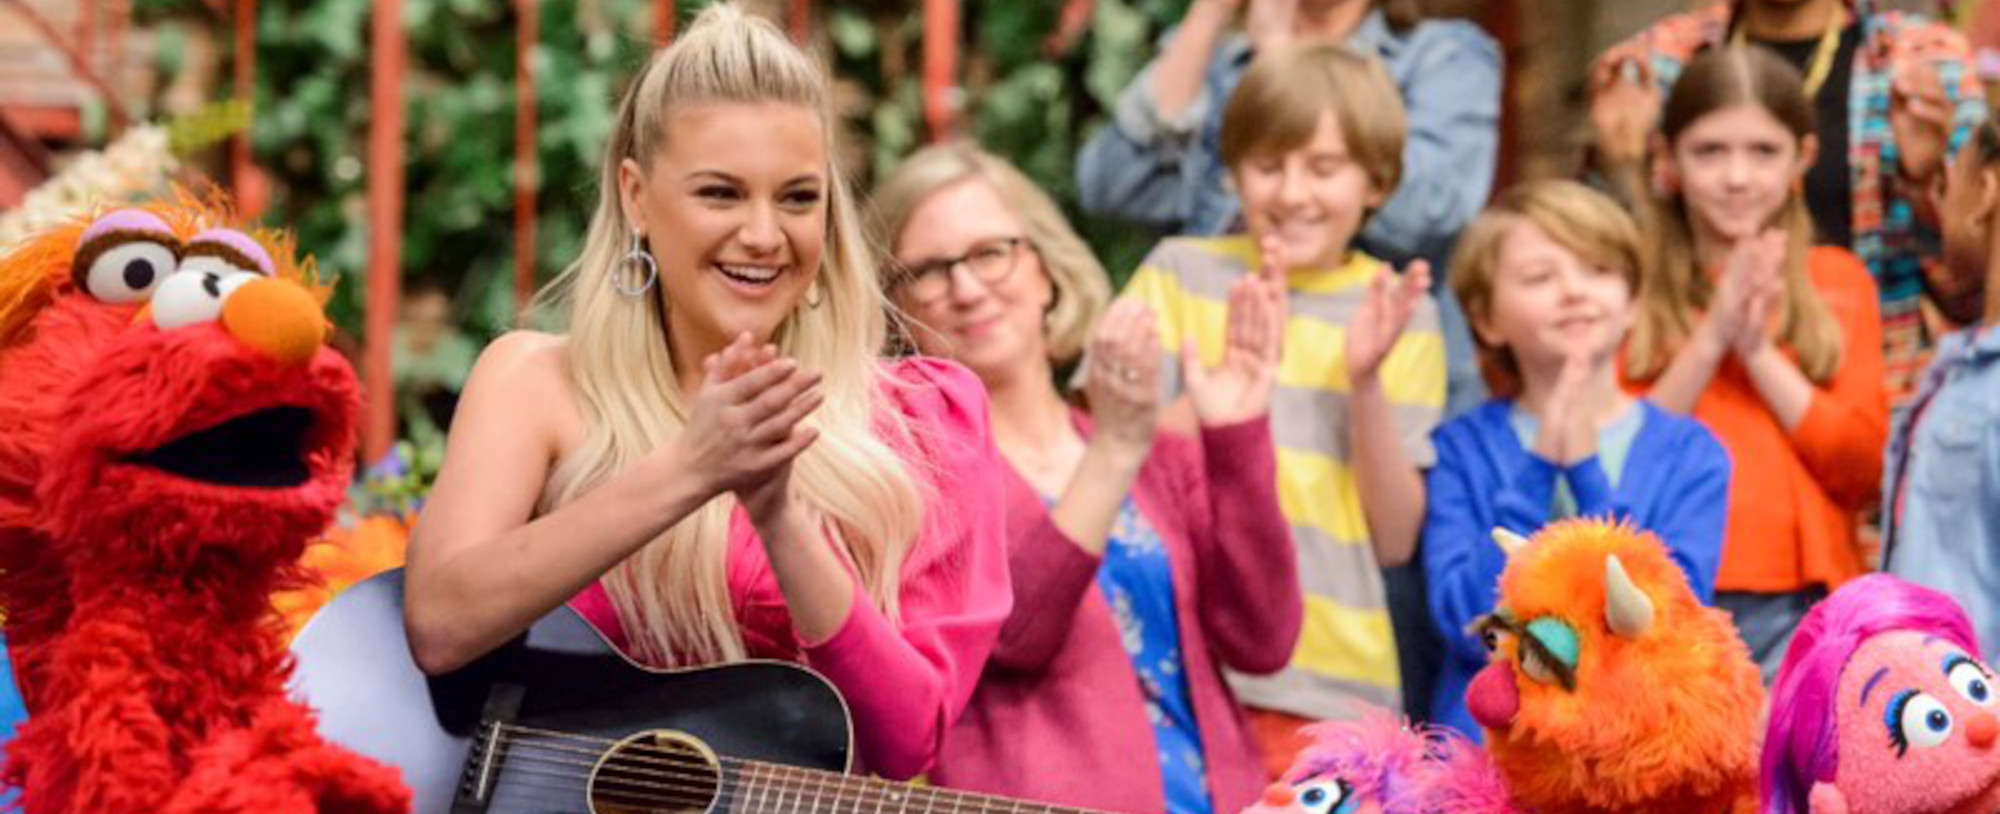 Kelsea Ballerini Visits Sesame Street to Sing About Families